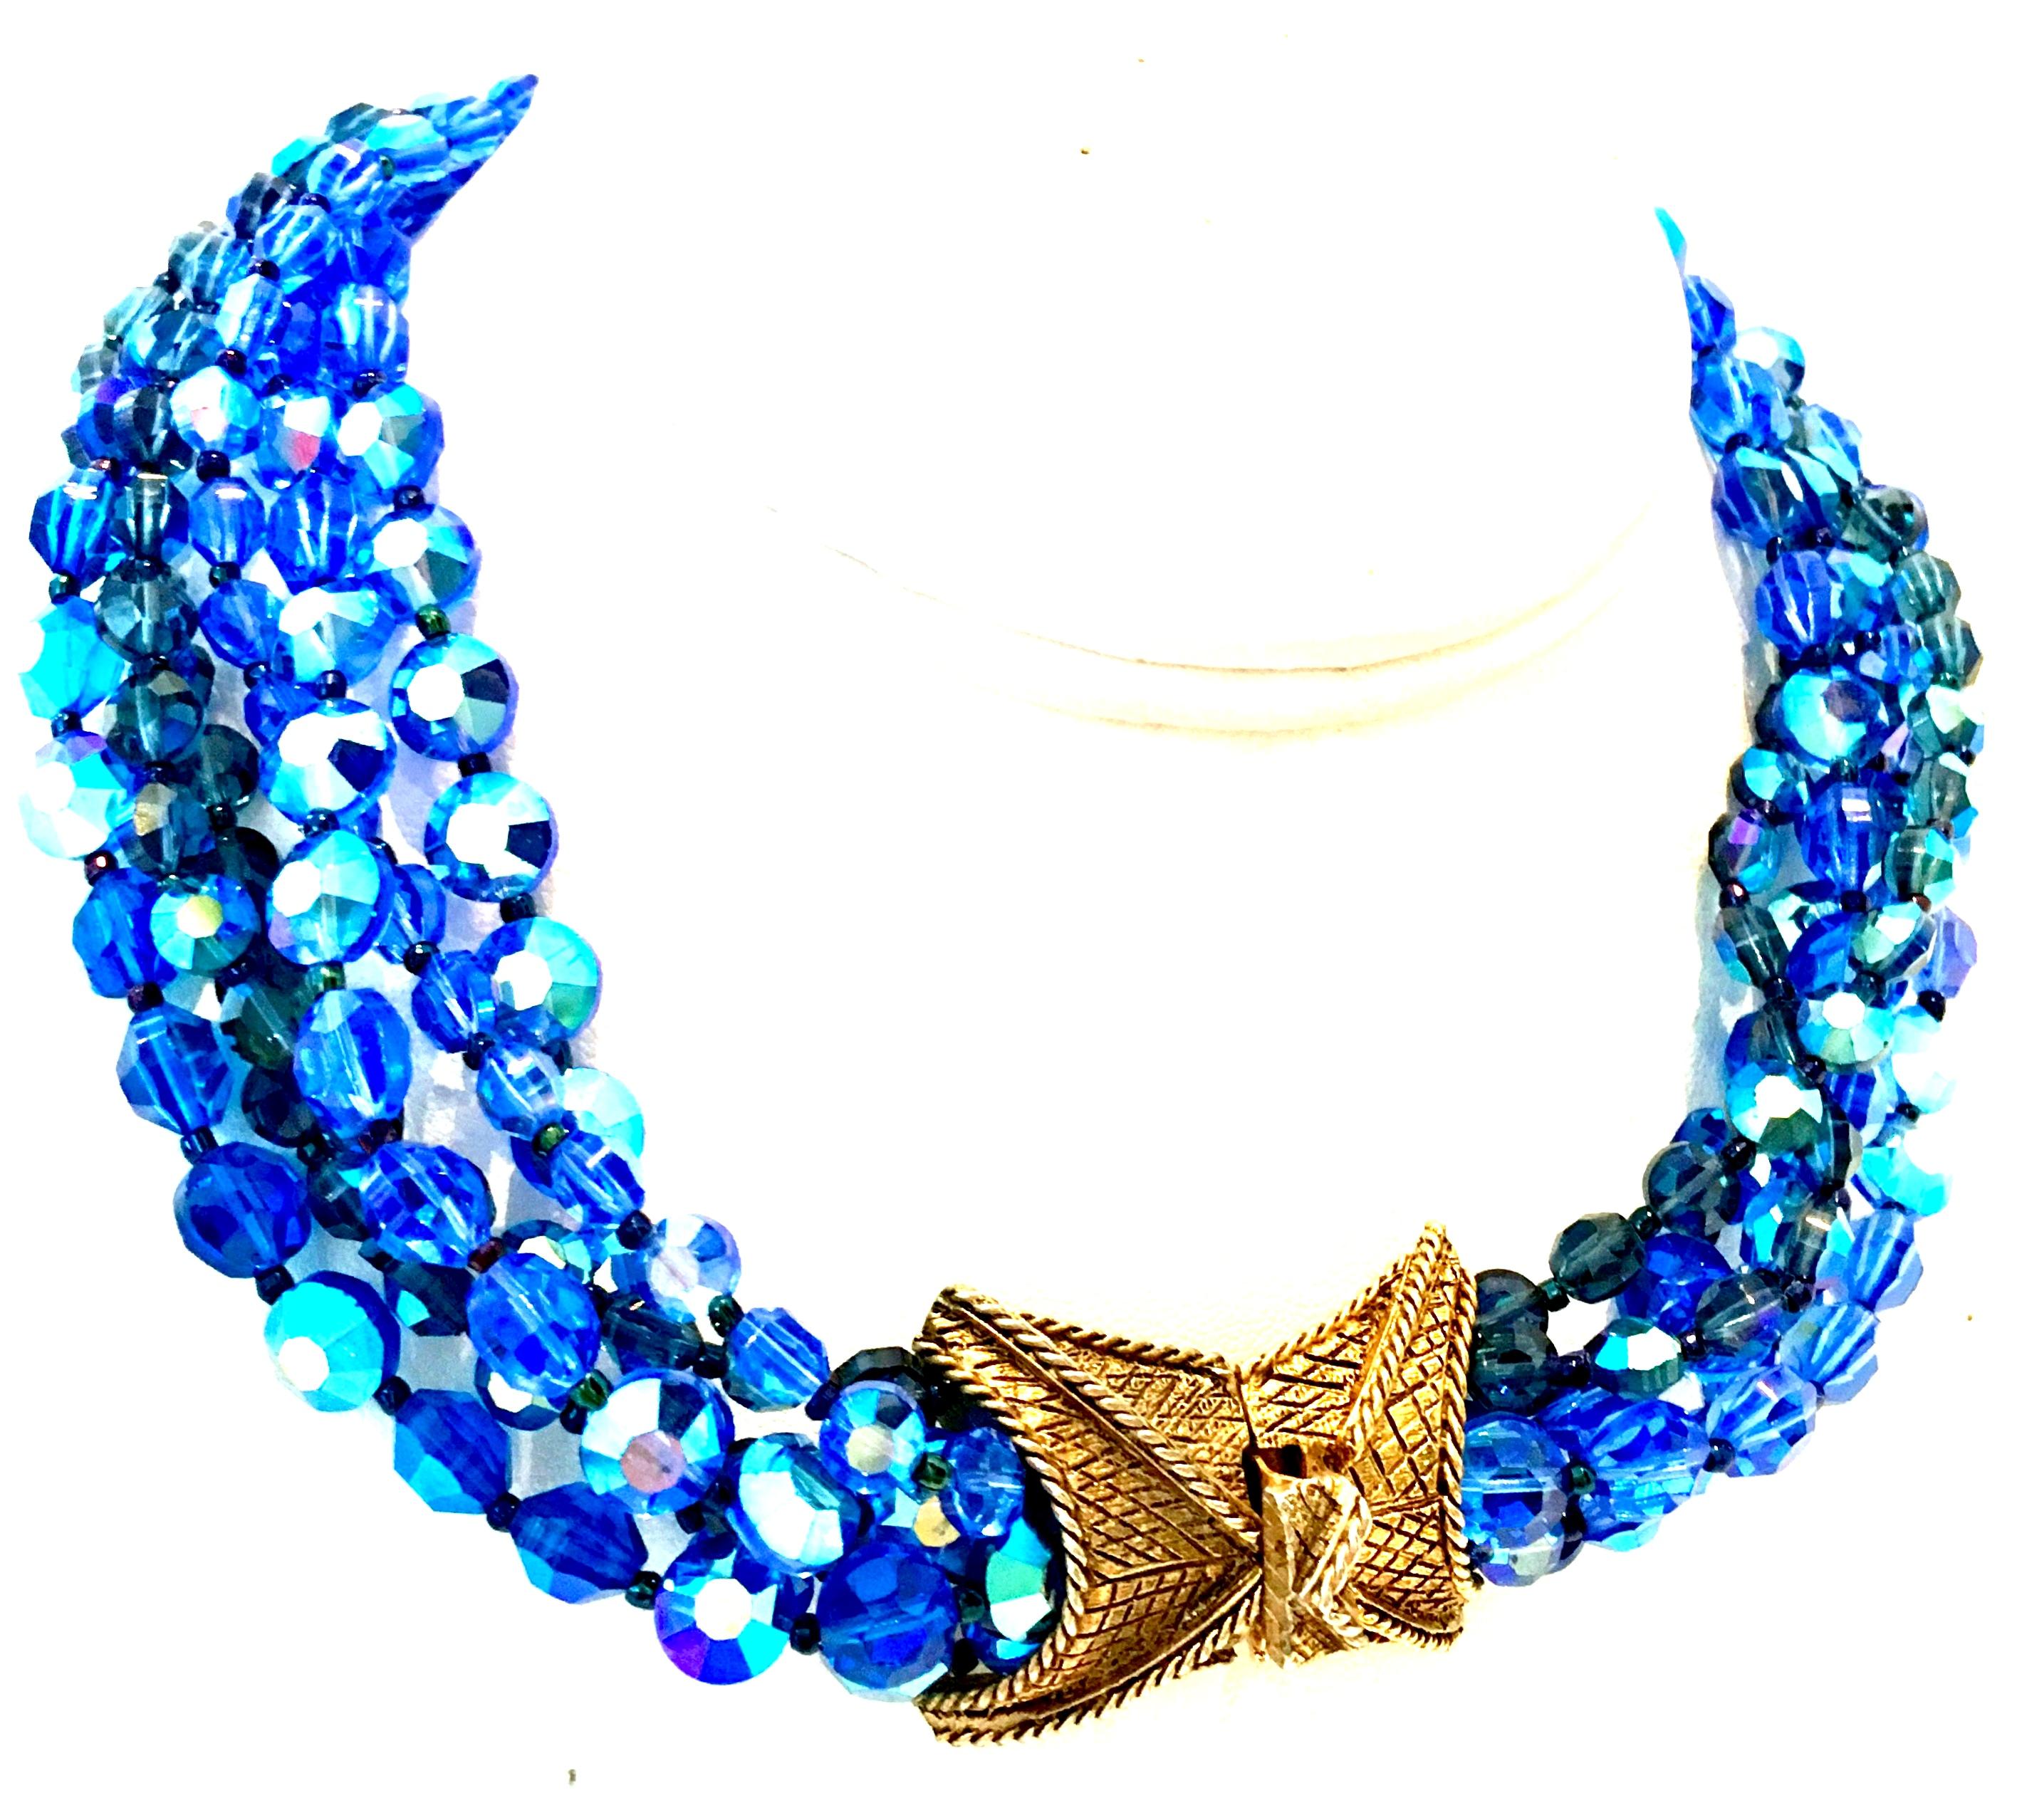 1960'S Outstanding Coppolo E Toppo Style Cut & Faceted Vibrant Shades of Blue Five-Strand Venetian Glass Bead Choker Style Necklace. This rare collectors piece features five strands of vibrant shades of blue iridescent tightly strung glass beads